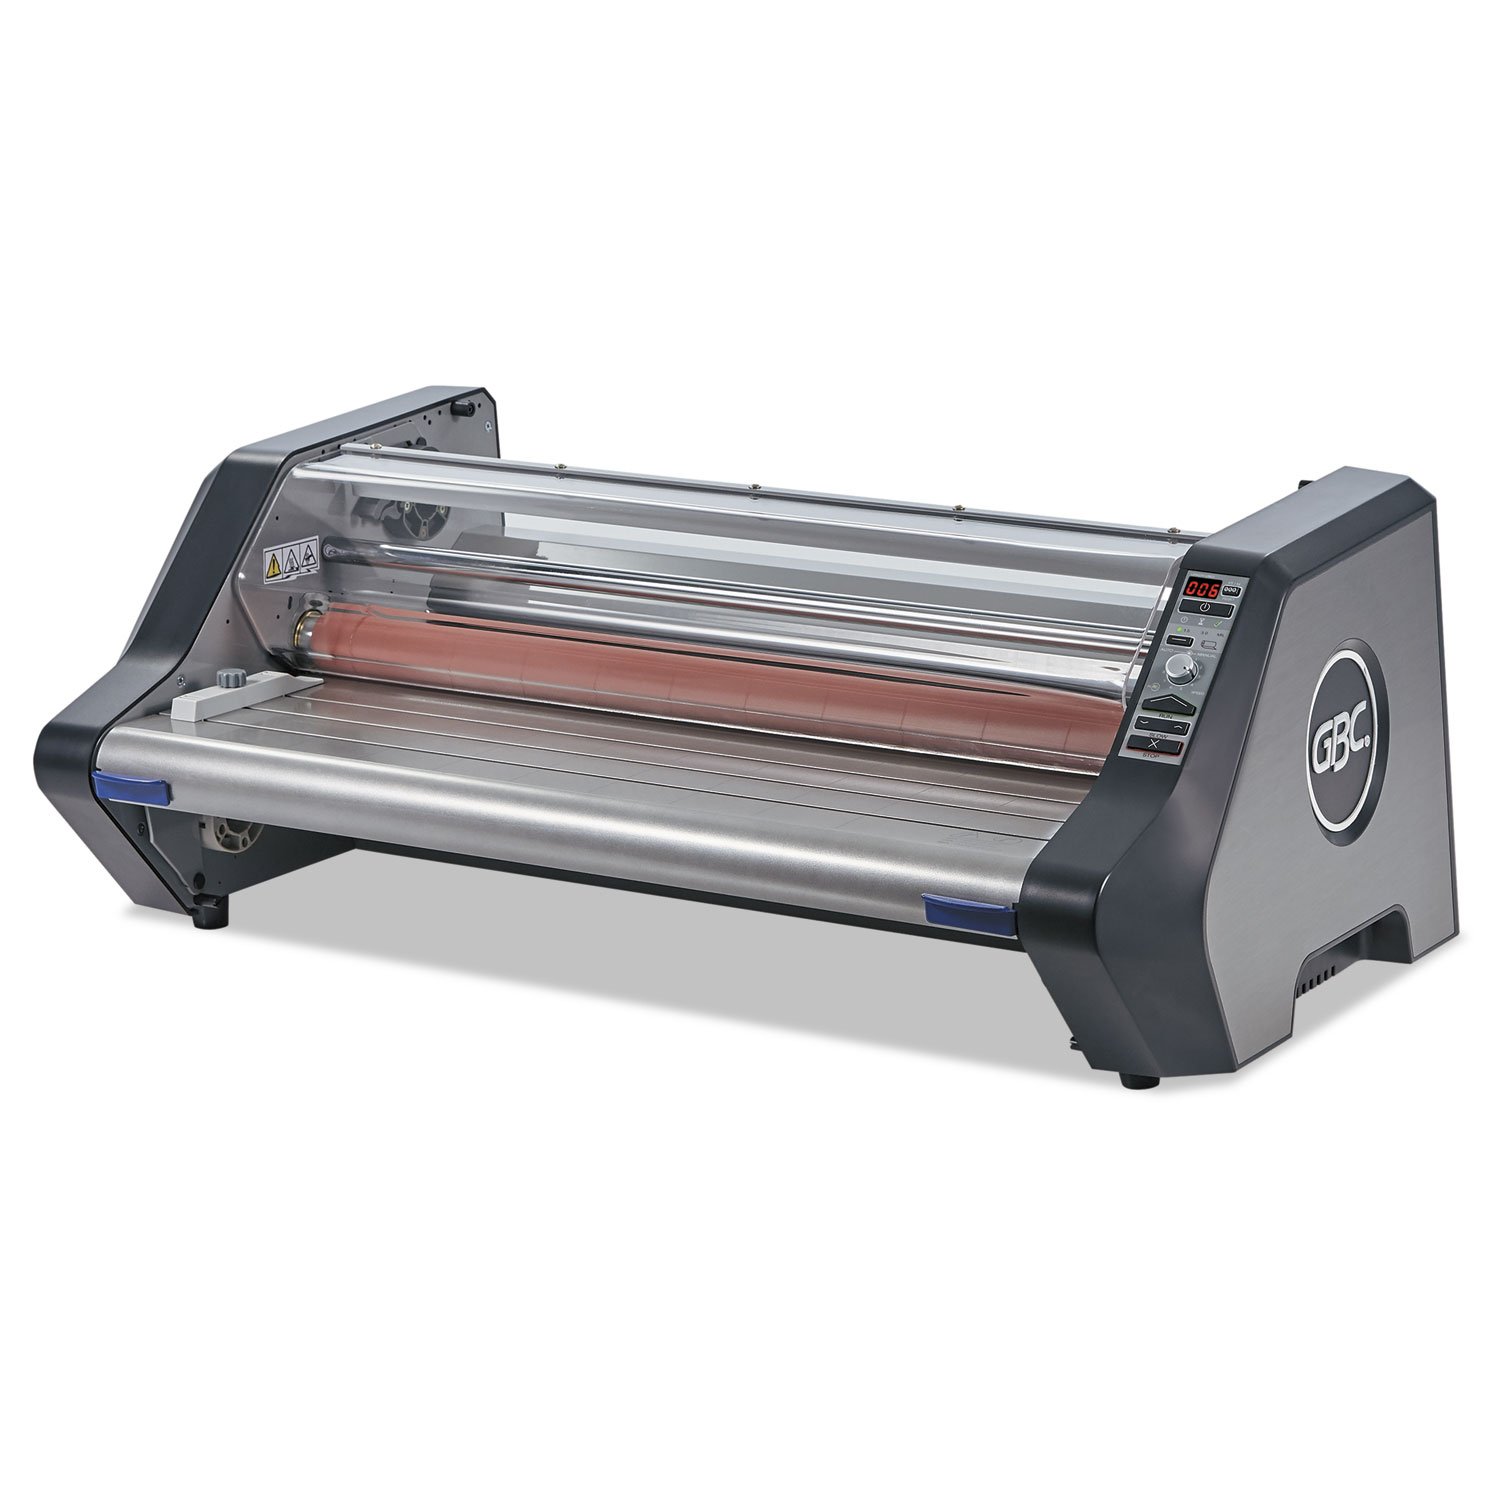 Ultima 65 Thermal Roll Laminator, 27 Wide, 3mil Max Document Thickness